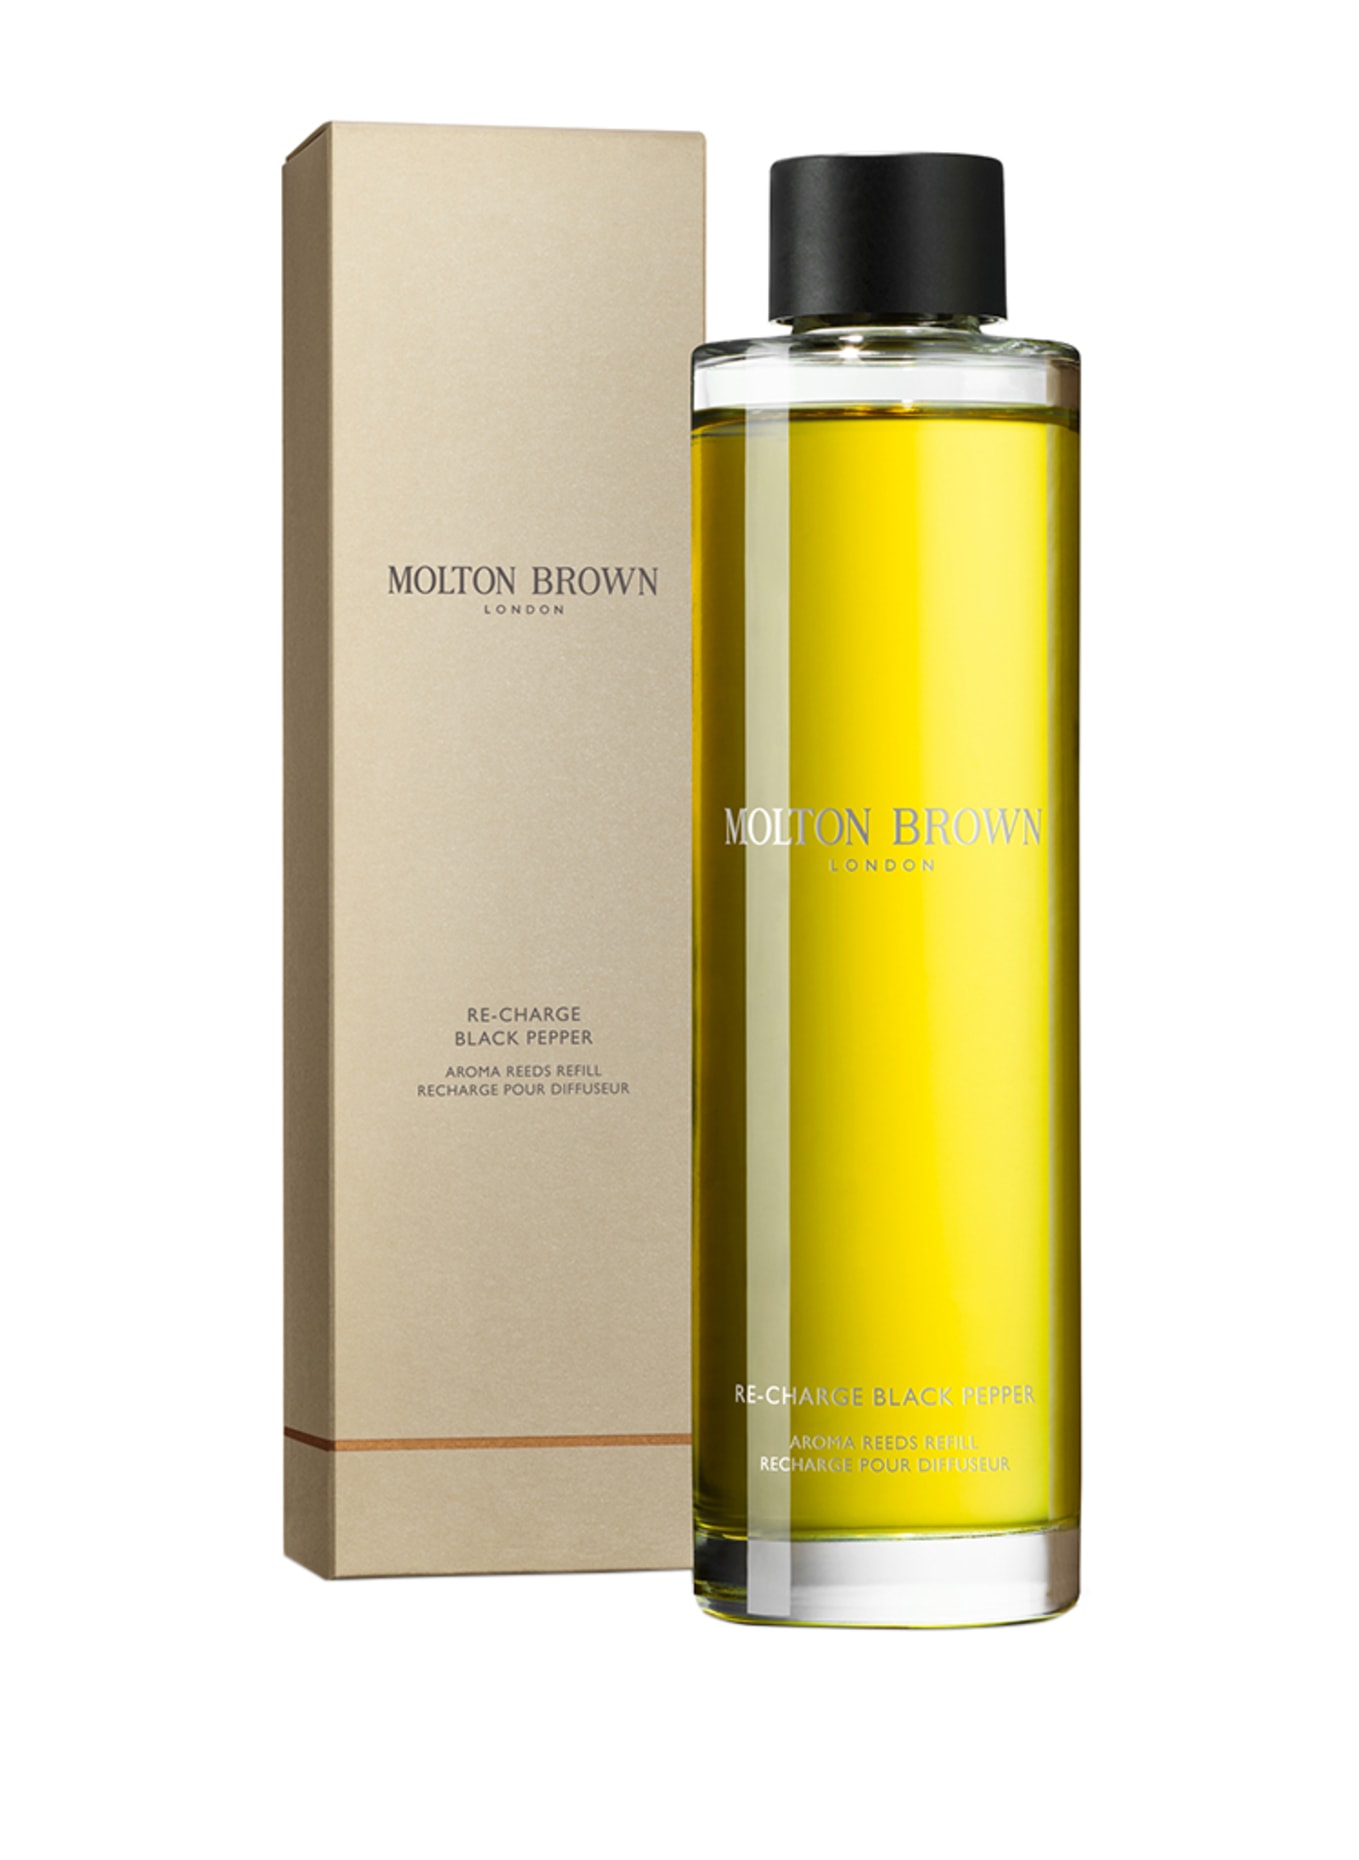 MOLTON BROWN RE-CHARGE BLACK PEPPER REFILL (Obrázek 2)